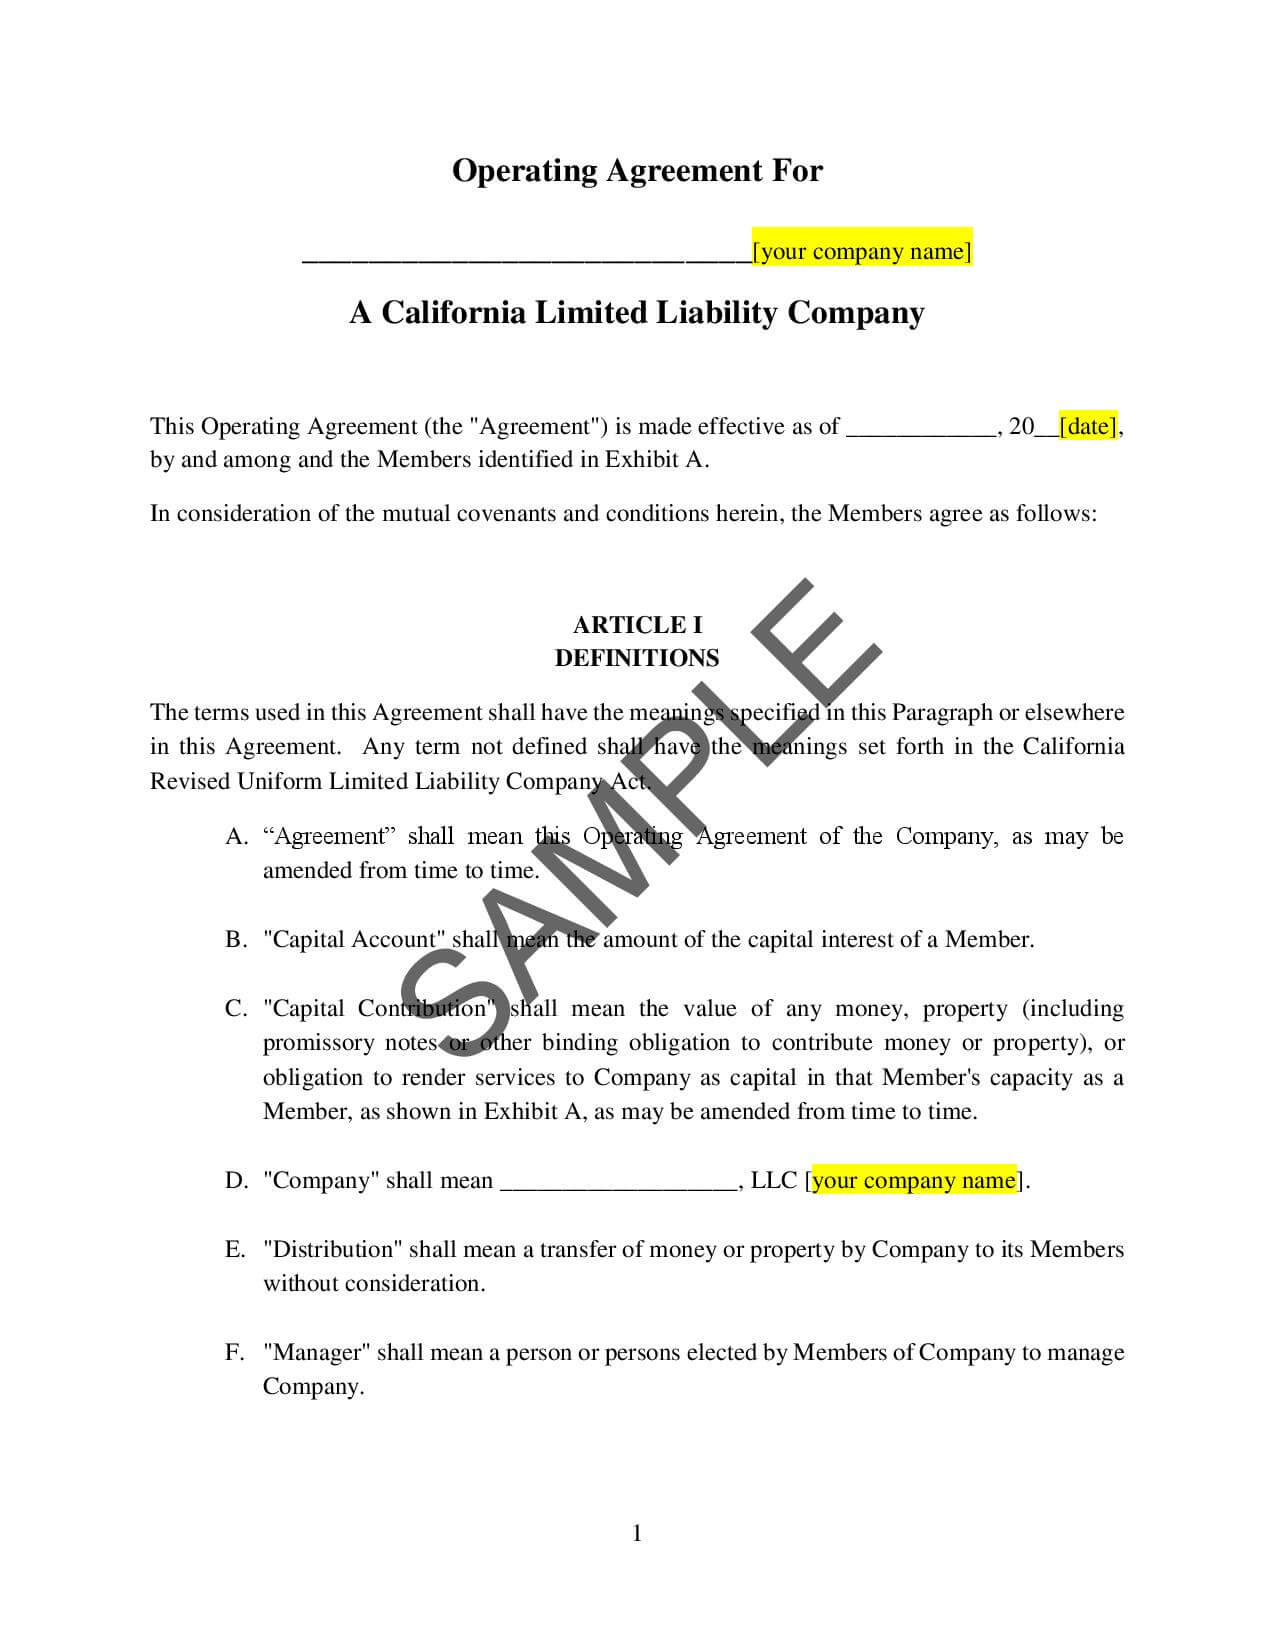 Llc No Operating Agreement Operating Agreement For Llc California Multi Member Manager Managed